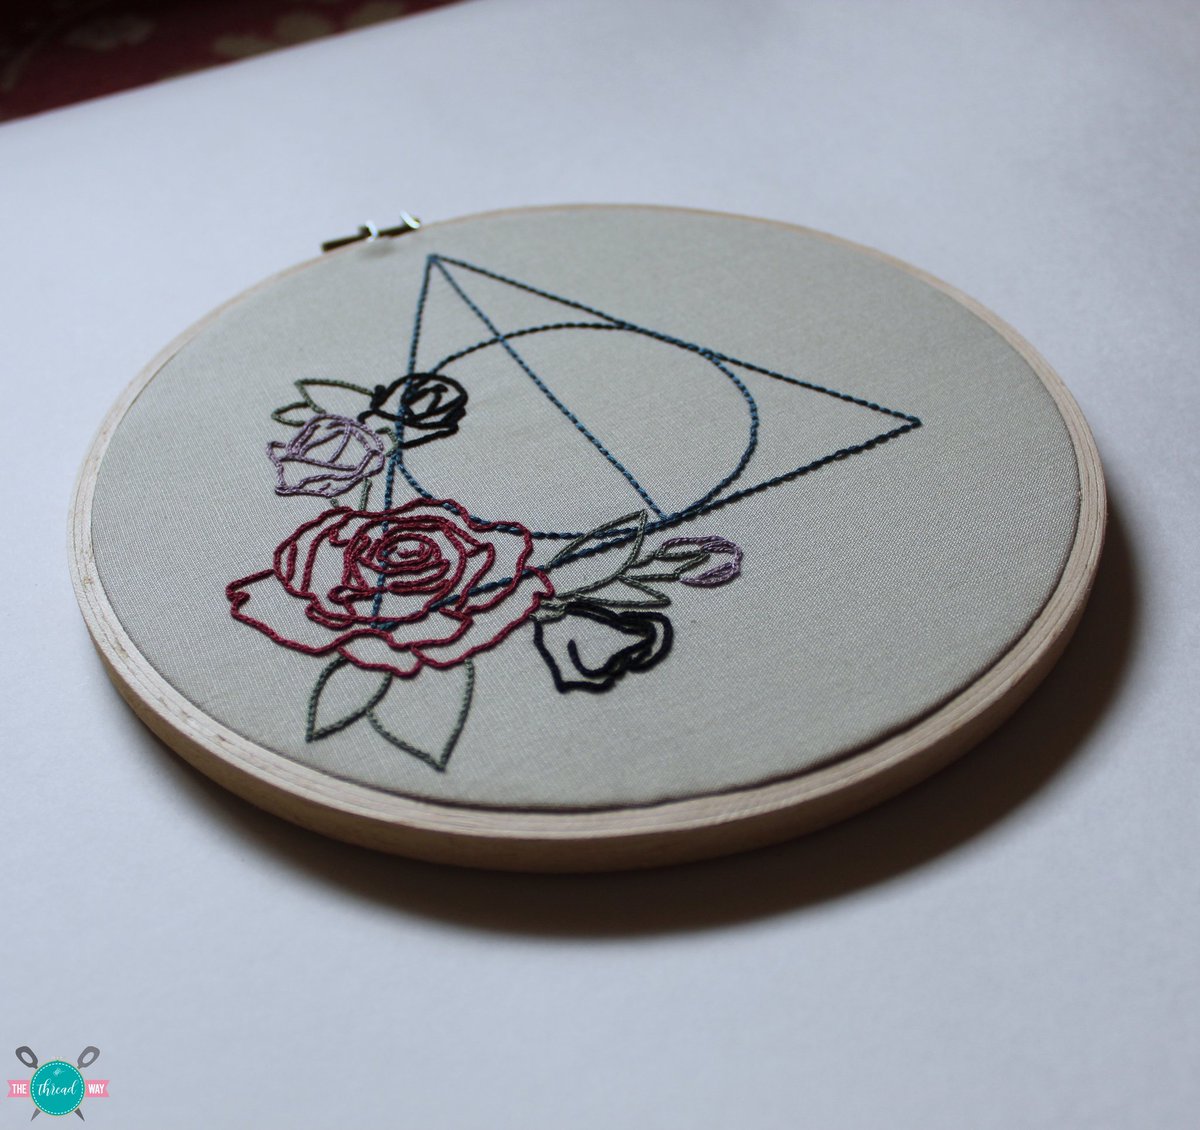 Harry Potter fans, where ya at? 💕
#thethreadway #embroideryart #embroiderydesign #embroideryhoop #embroideryfloss #handembroidery #HarryPotter #harrypotterfanart